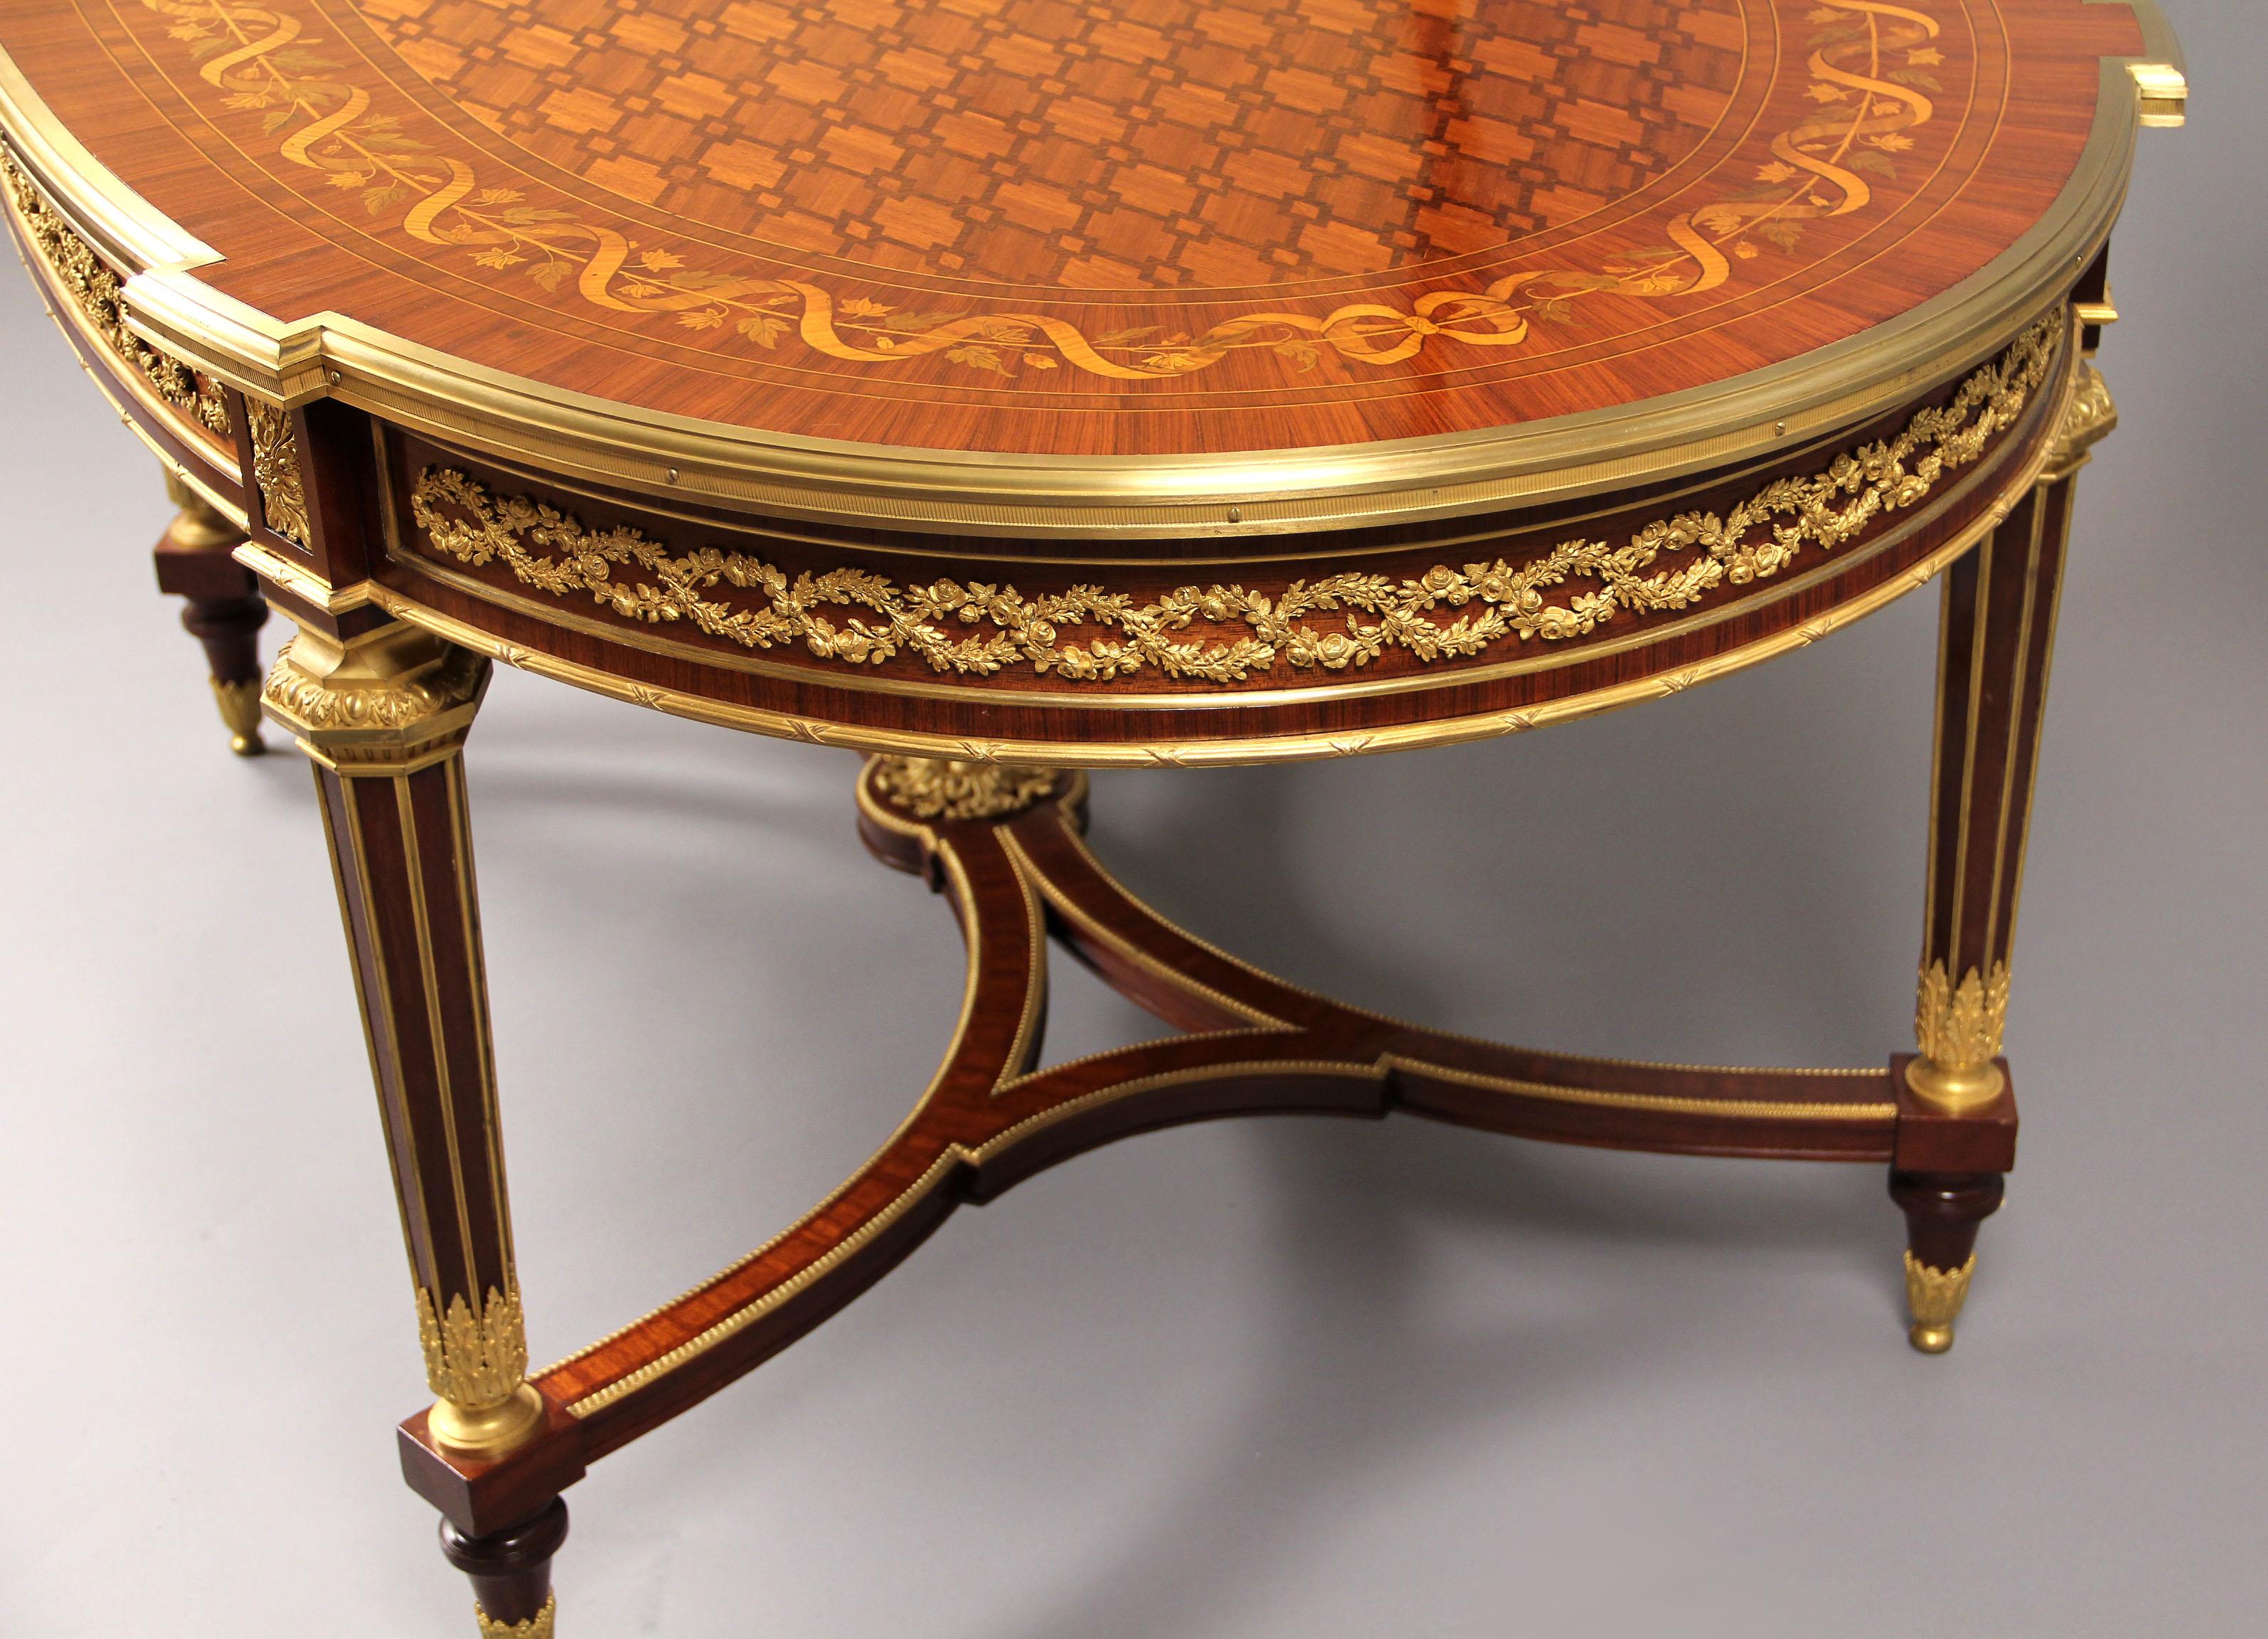 Gilt Rare Late 19th Century Inlaid Marquetry Center Table by François Linke For Sale